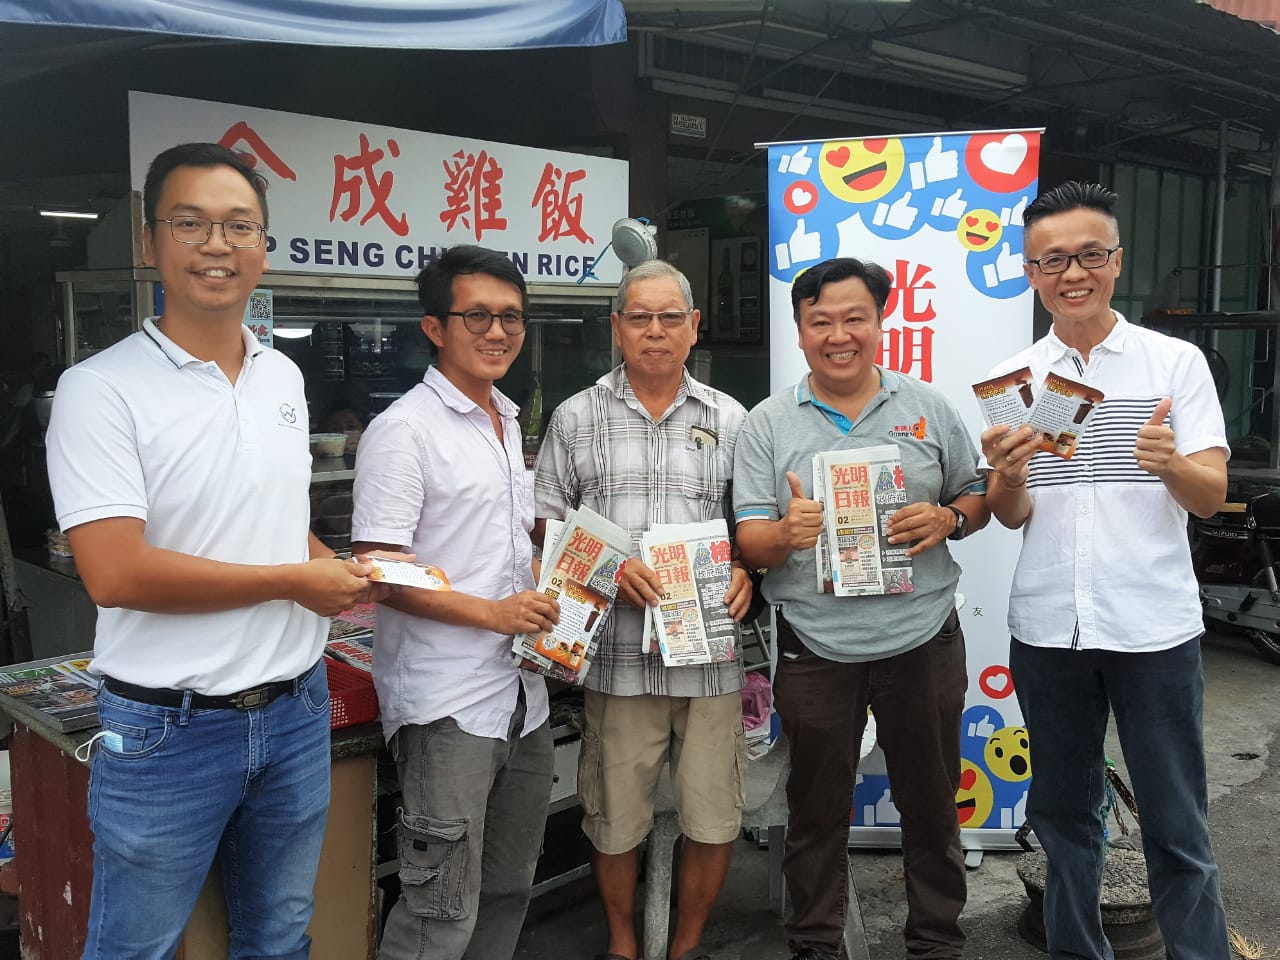 Zhan Hanlin, the reporter in front of the Beihai Raja Uda Synthetic Tea Room, said that he is very happy that he can also bring healthy drinks to regular customers, and at the same time improve his newspaper performance. From the left, general agent Chen Weiming, reader, newspaper publisher Zhan Hanlin, executive officer of Beihai Distribution Department Yang Yuanzong, and chairman of the board of directors of Sun Sun Food Industry Co., Ltd. Chen Bingqin took a group photo.